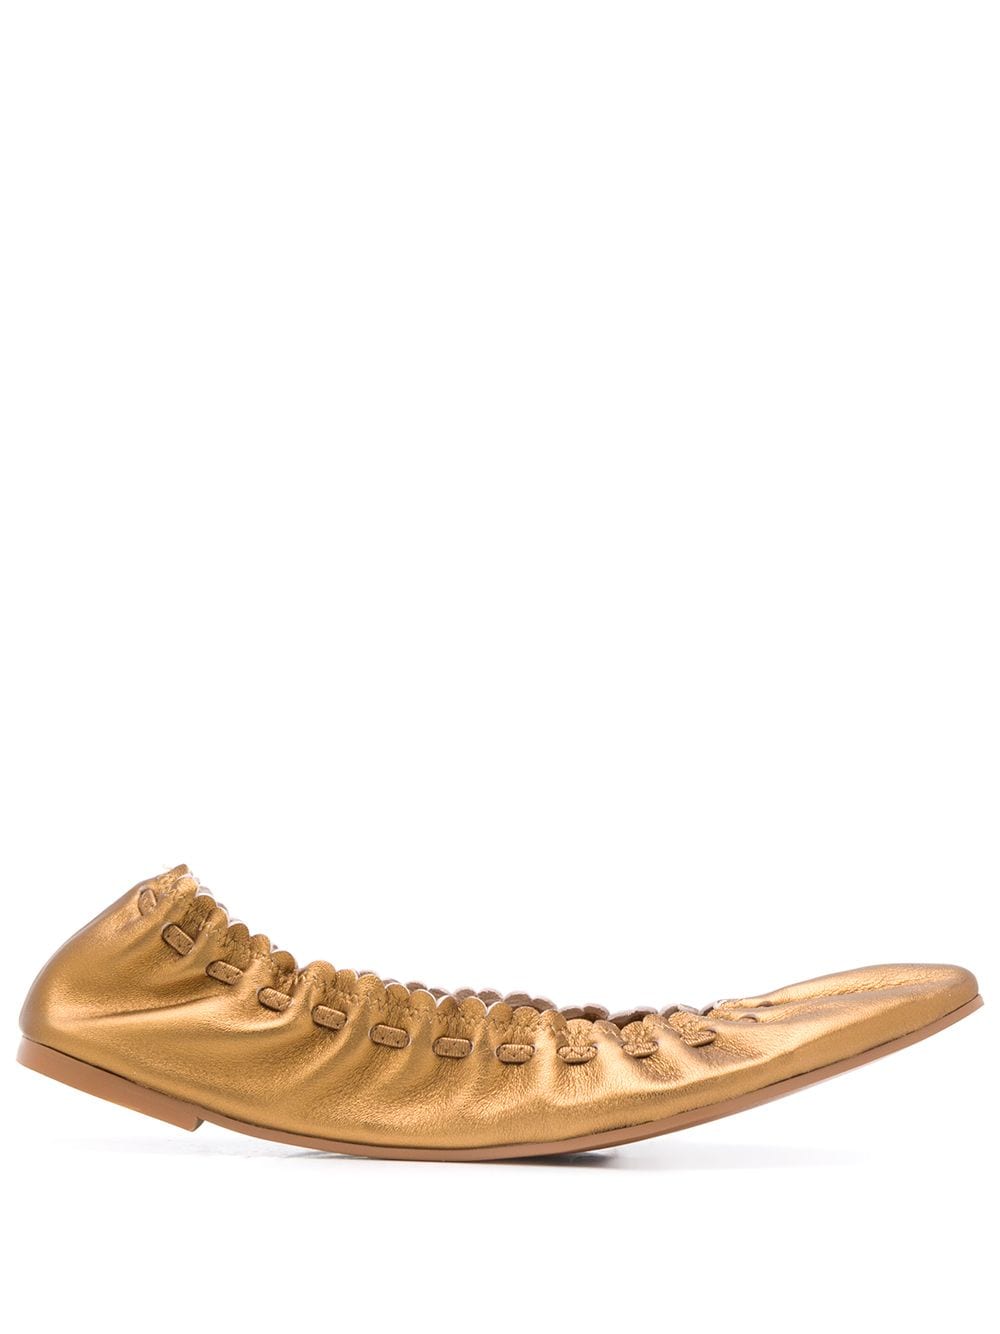 See By Chloé Metallic Ballerinas In Gold